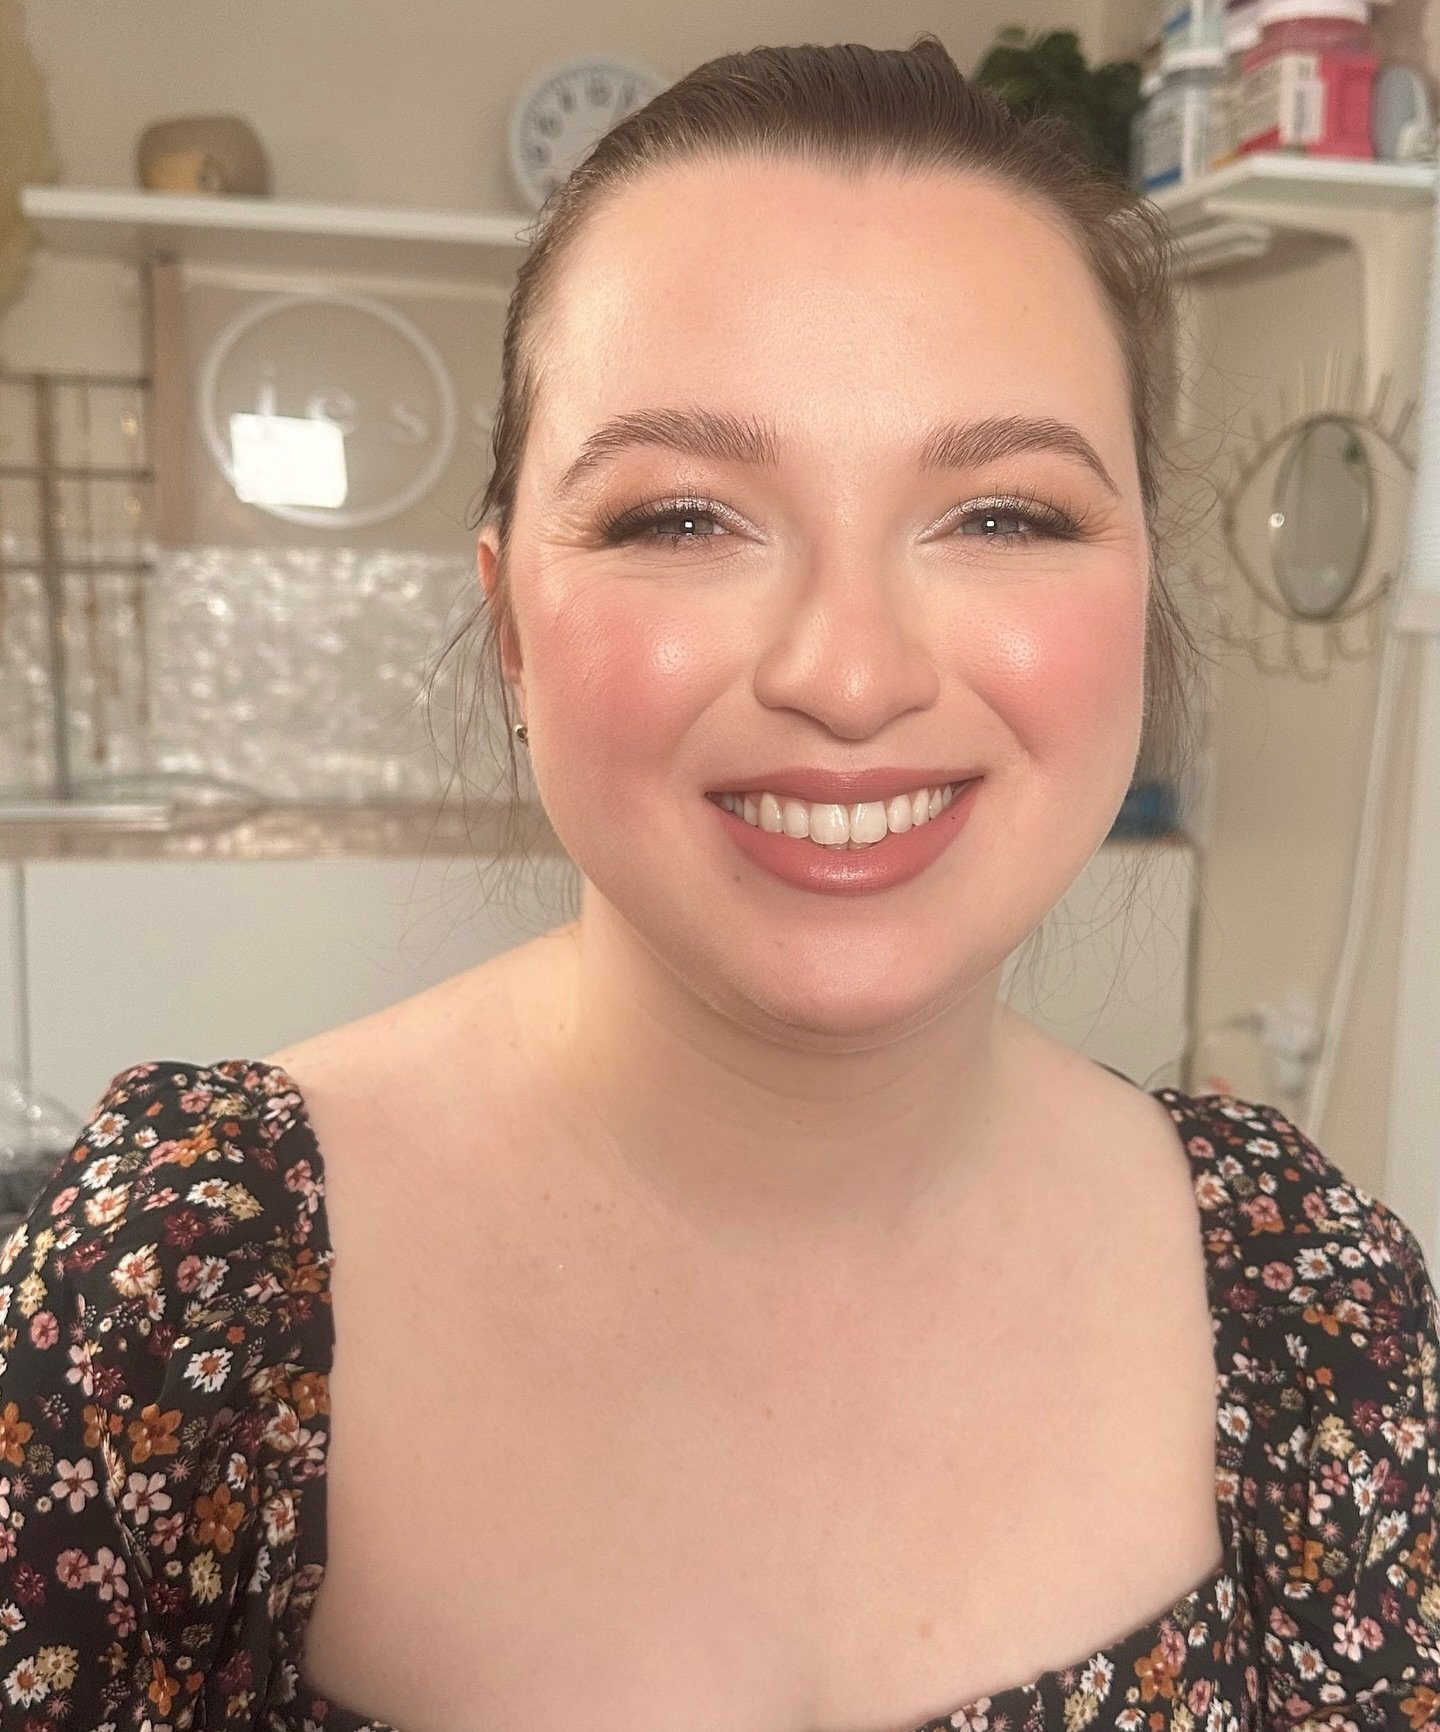 What a glowing beauty 😍🥰🌸🌷

Loved loved loved meeting my sweet bride at her trial ❤️

#makeupartist#newportmakeupartist#newportbride#newportweddings#hairstylist#bostonhairstylist#bridalhair#newenglandhairstylist#salemnhstylist #pageantmakeup#page